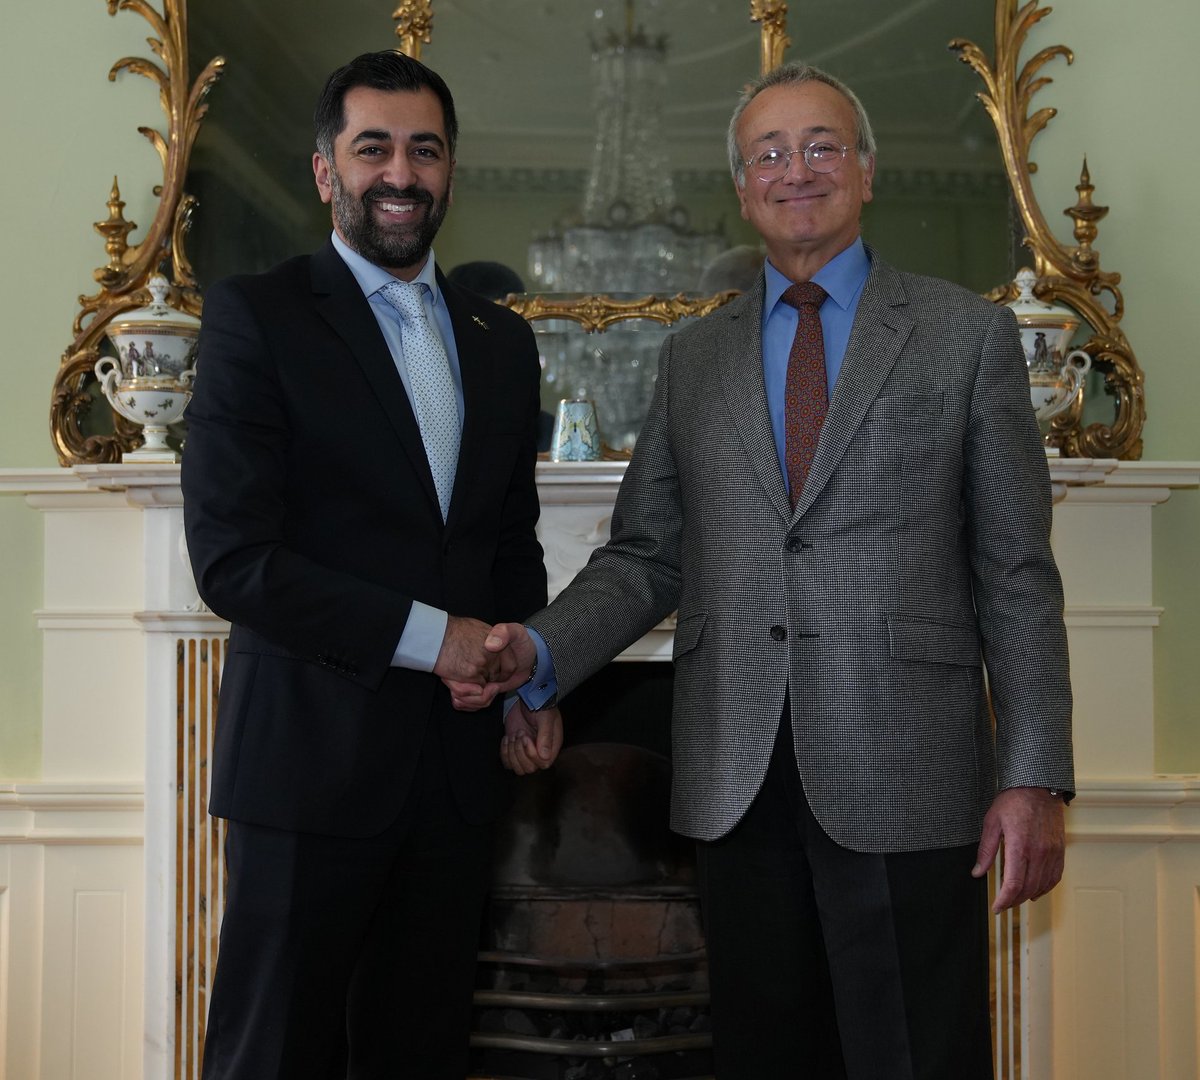 First Minister @HumzaYousaf reiterated his intention to build on Scotland’s strong and enduring relationship with the #EU, including on renewable energy, research and innovation and culture. He discussed shared priorities and values with EU Ambassador @PedroSerranoEU.